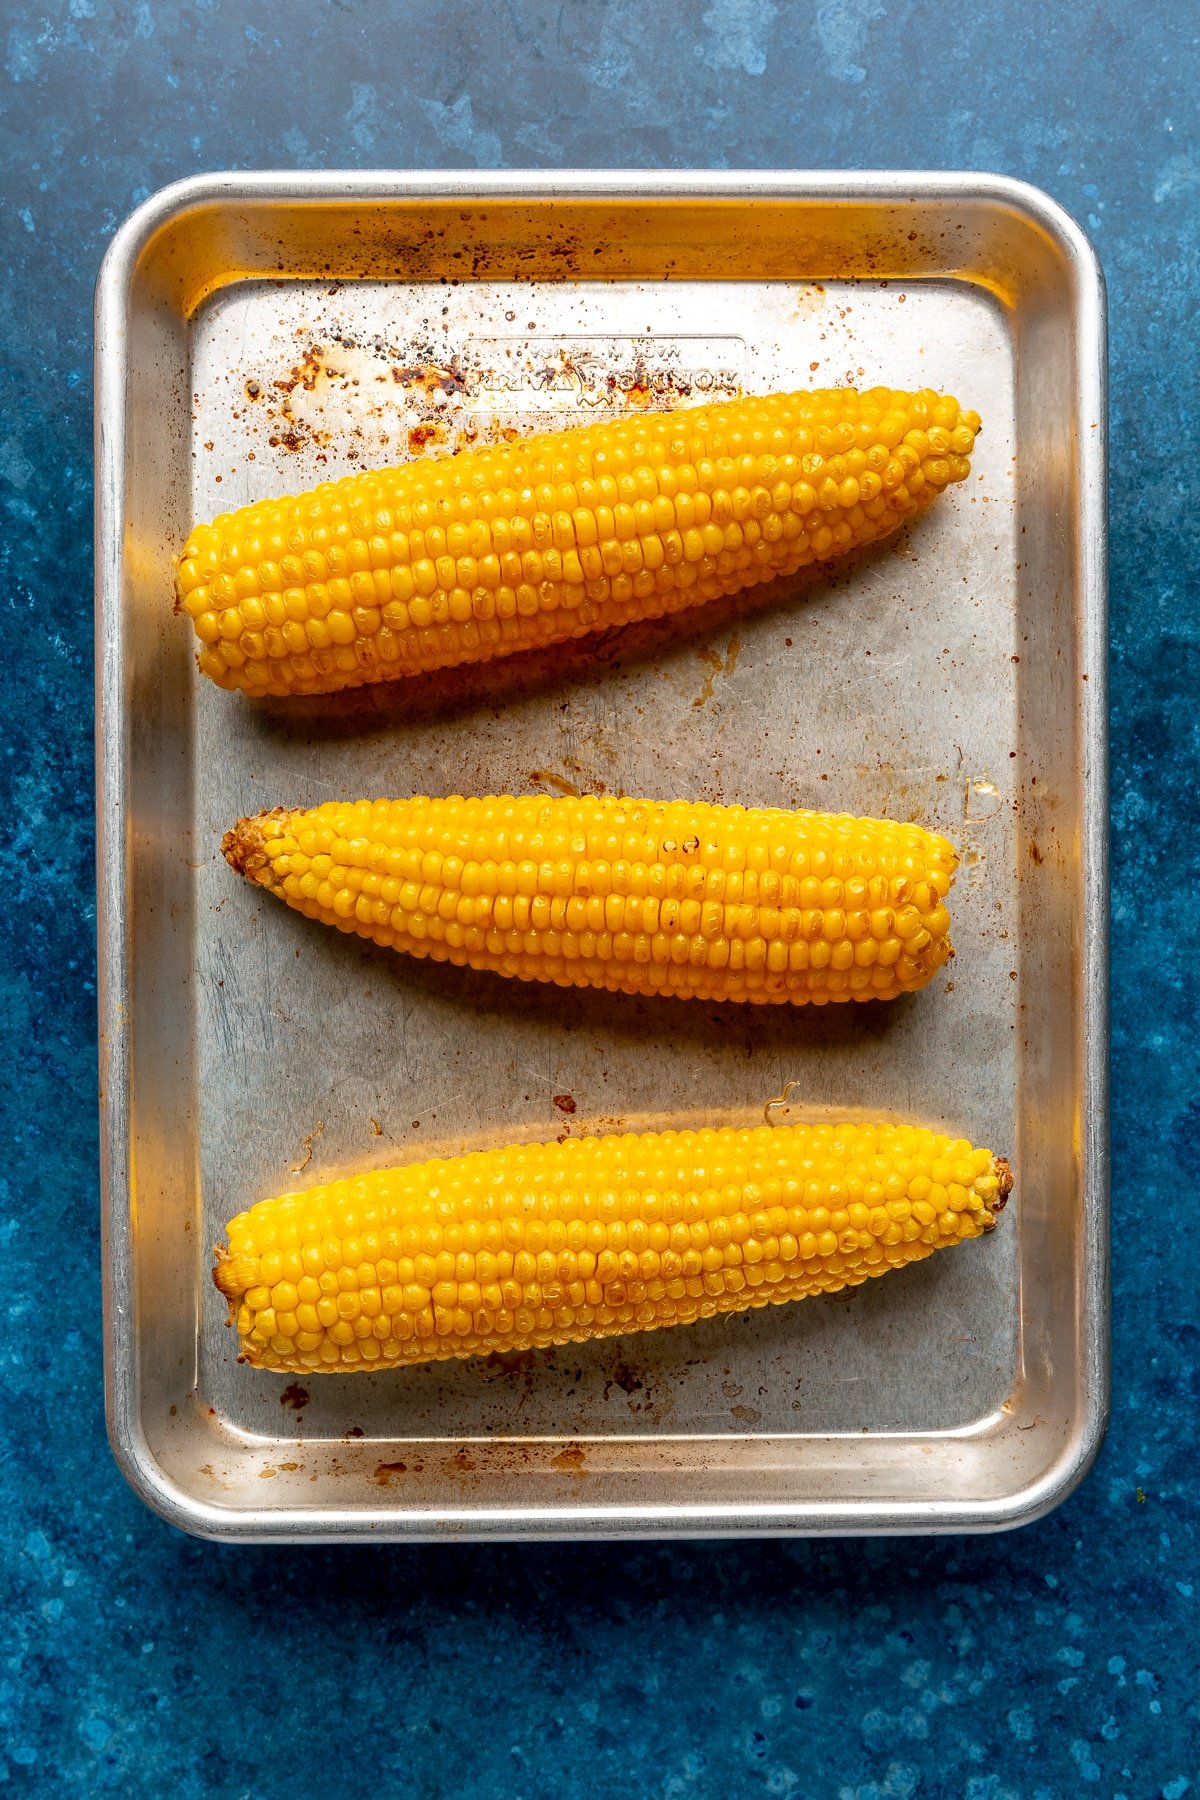 Roasted corn cobs sit on a meral tray.